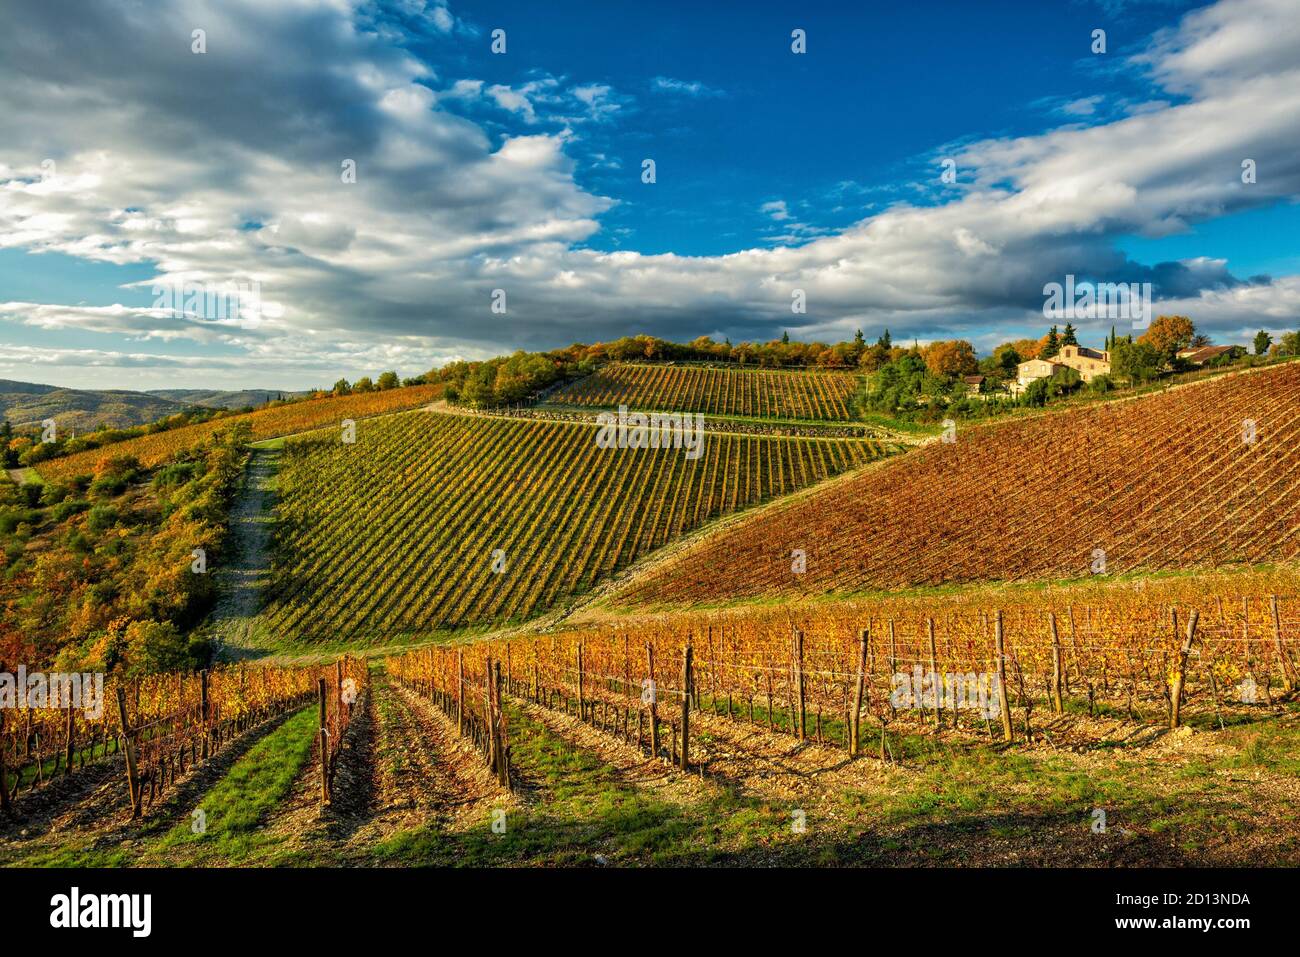 an amazing vineyard own of the Ama Chianti Classico wine, located in Gaiole in Chianti, Tuscany (Italy) Stock Photo